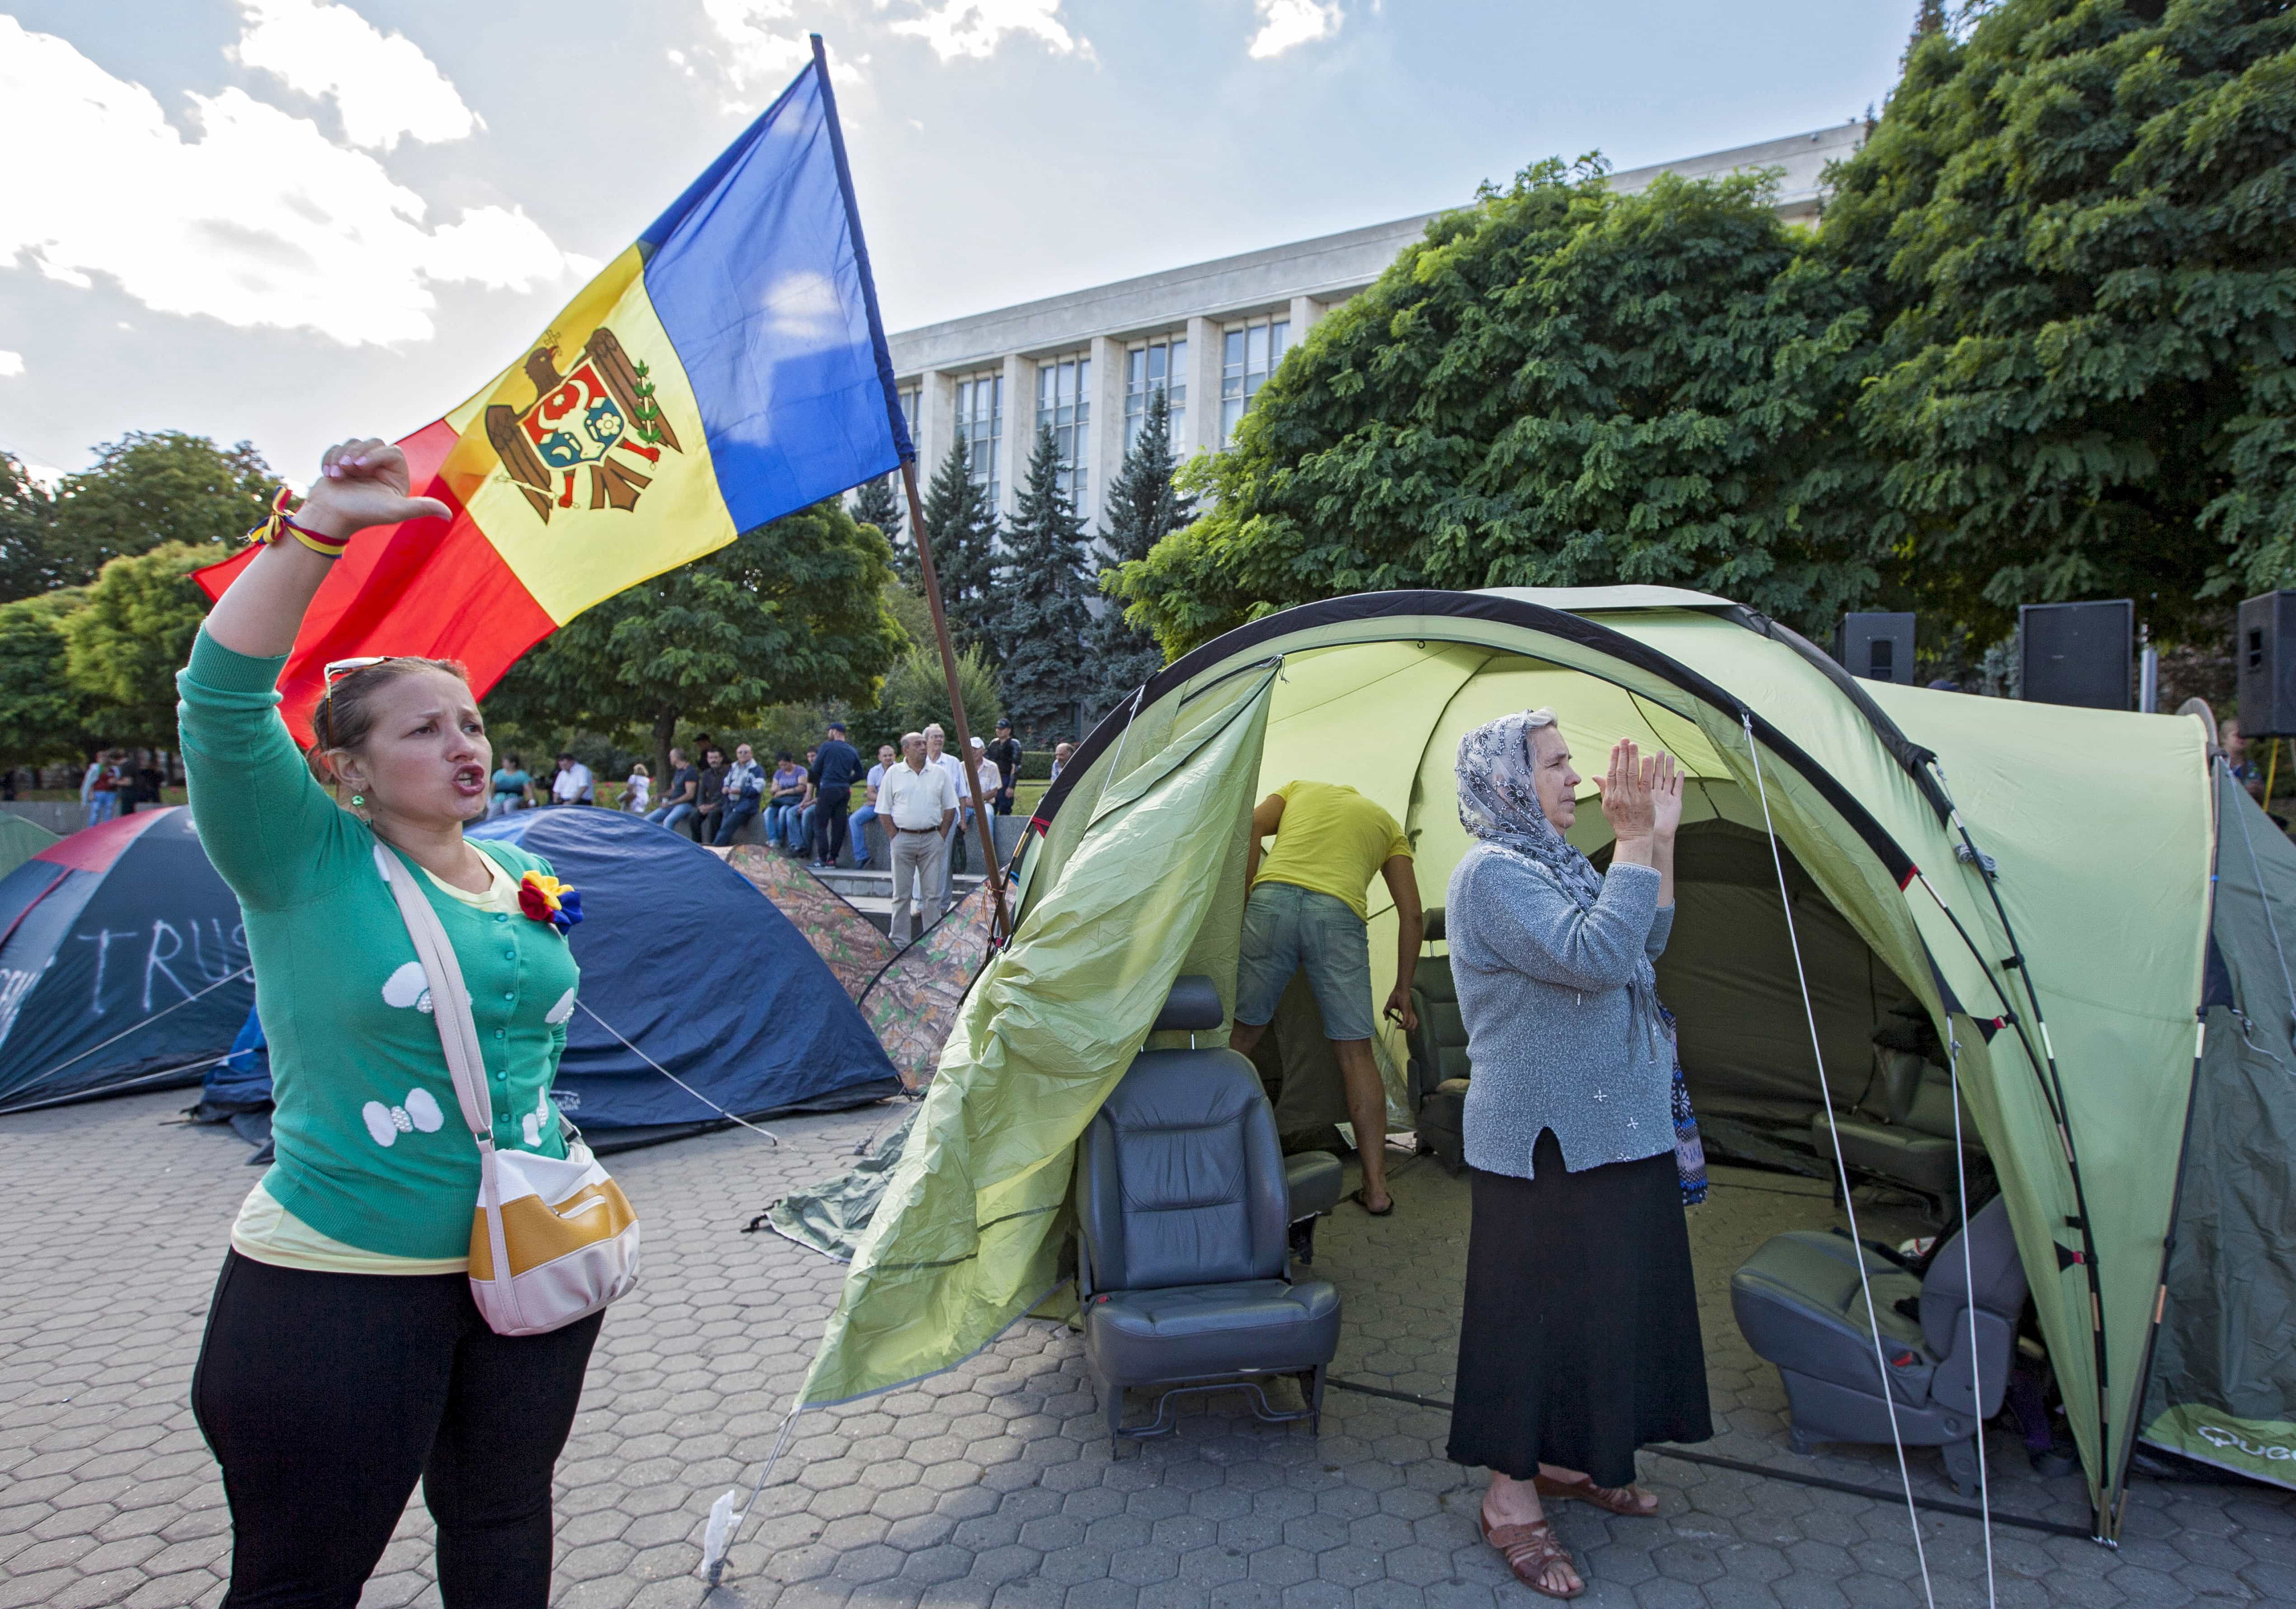 People chant slogans as they stand in front of the tents set by protesters after an anti-government rally, organised by the civic platform "Dignity and Truth" (DA), in Chisinau, Moldova, 7 September 2015, REUTERS/Viktor Dimitrov